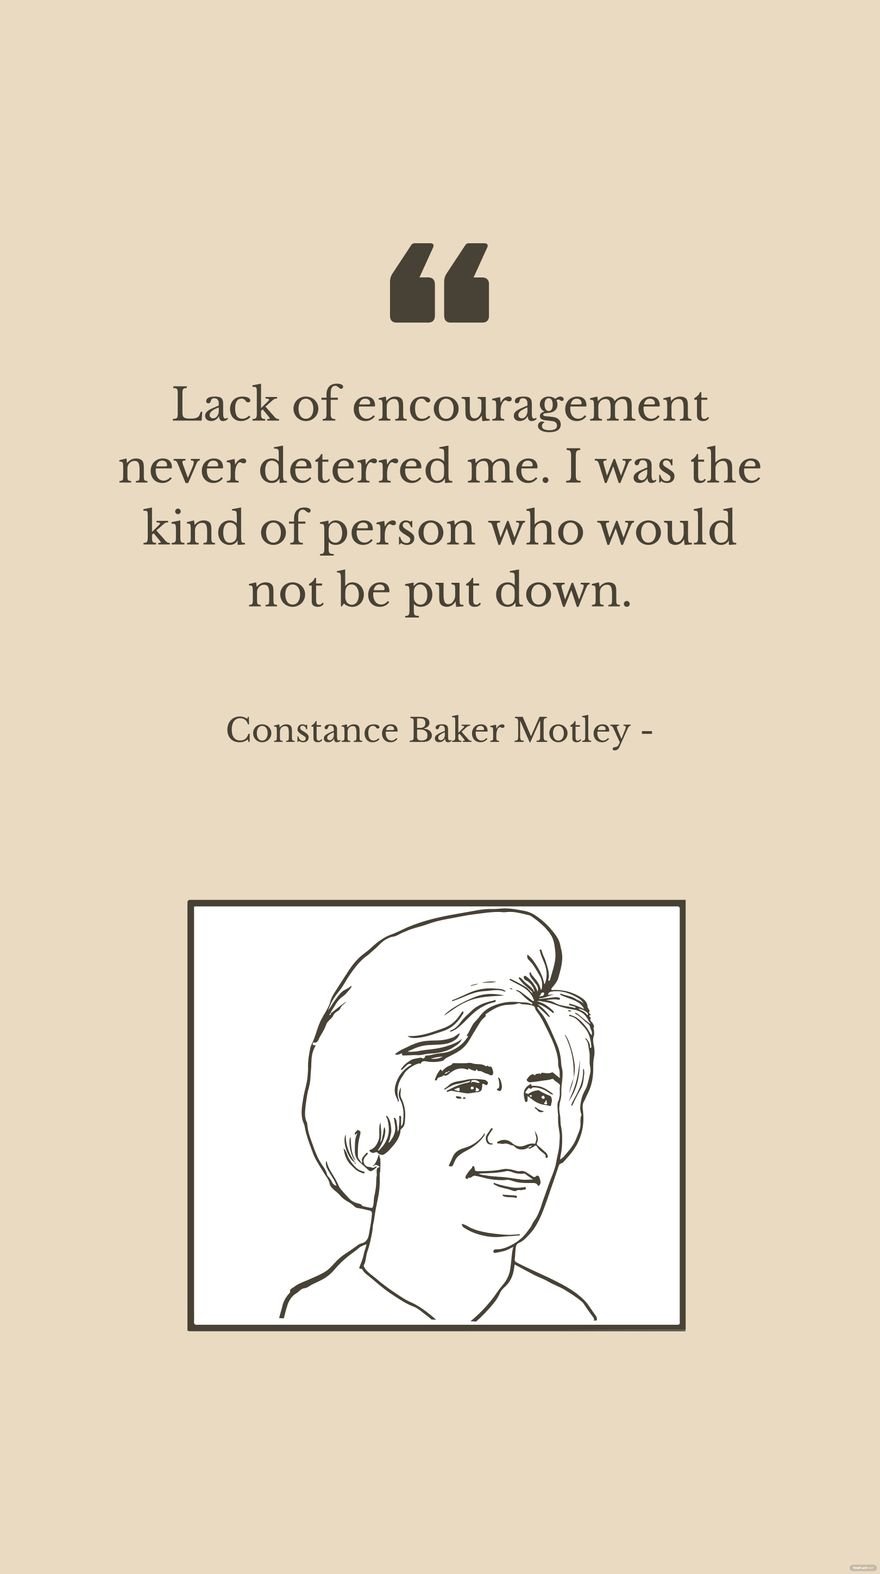 Constance Baker Motley - Lack of encouragement never deterred me. I was the kind of person who would not be put down.